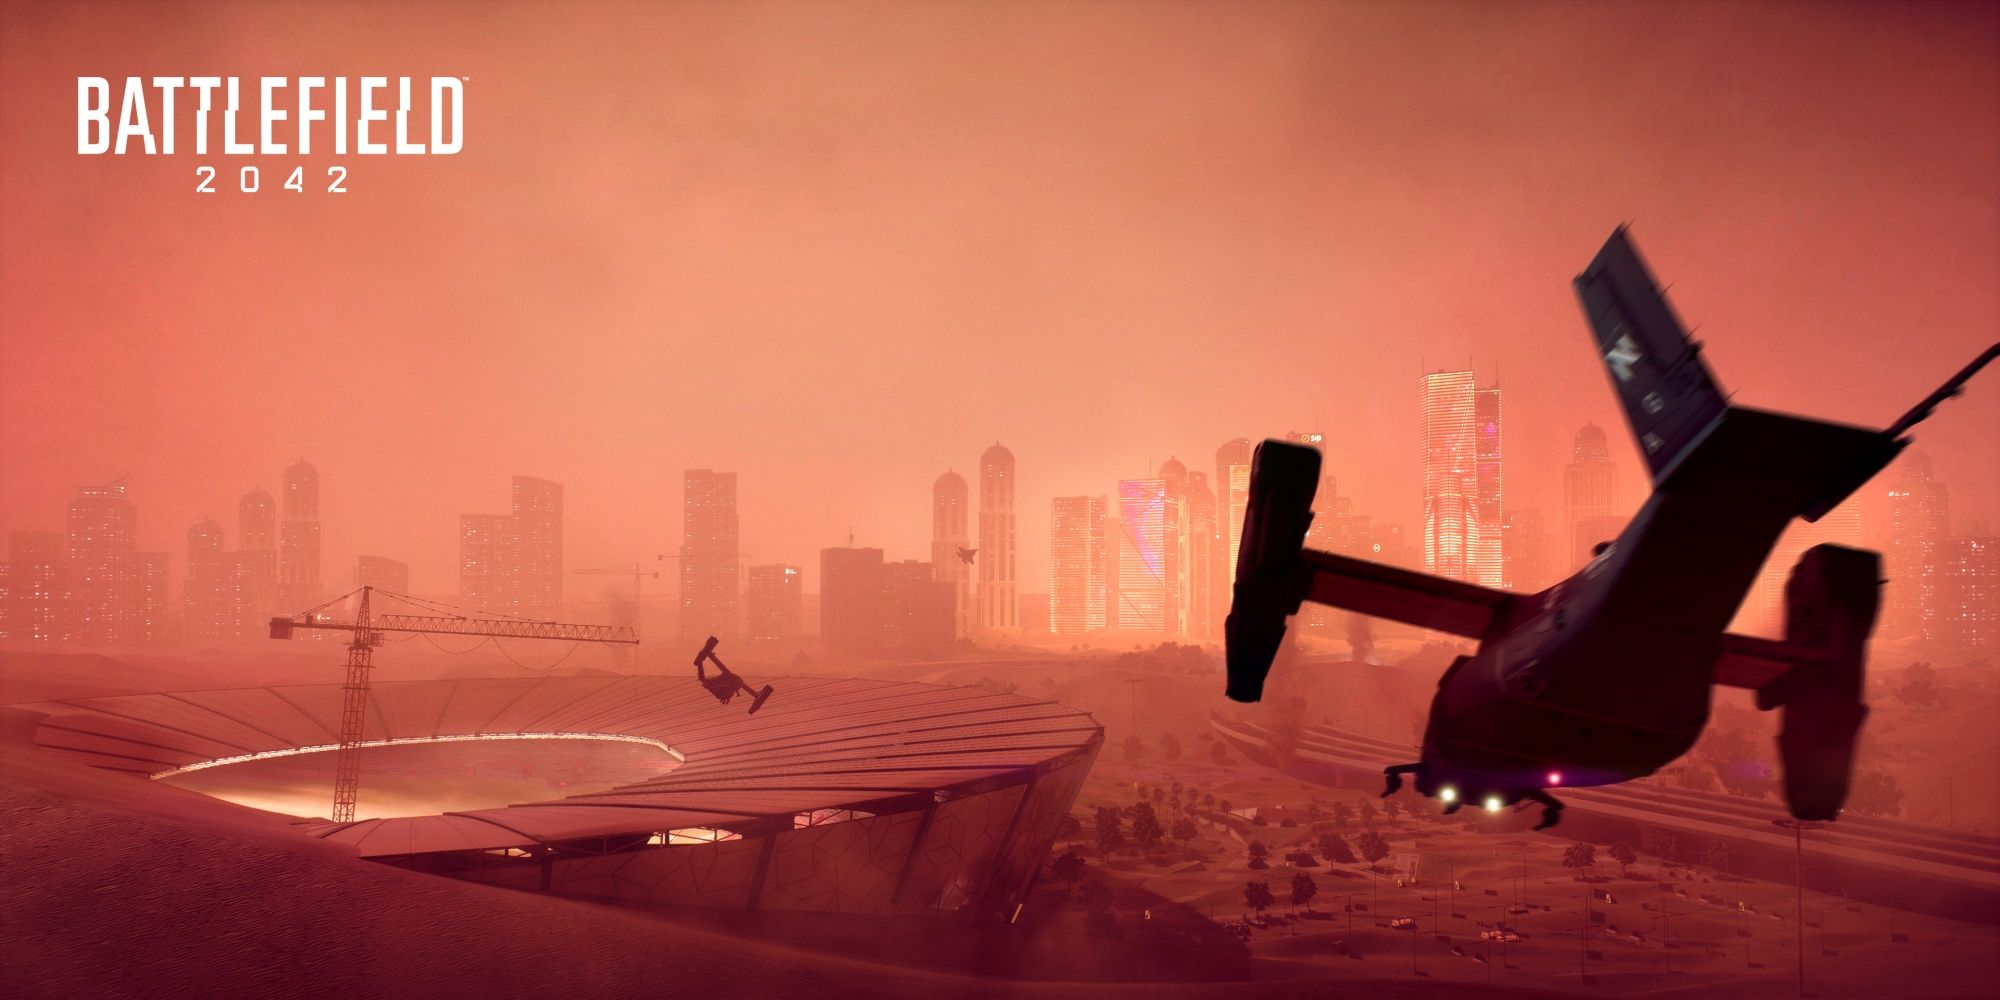 An helicopter flying through a sandstorm in Battlefield 2042.